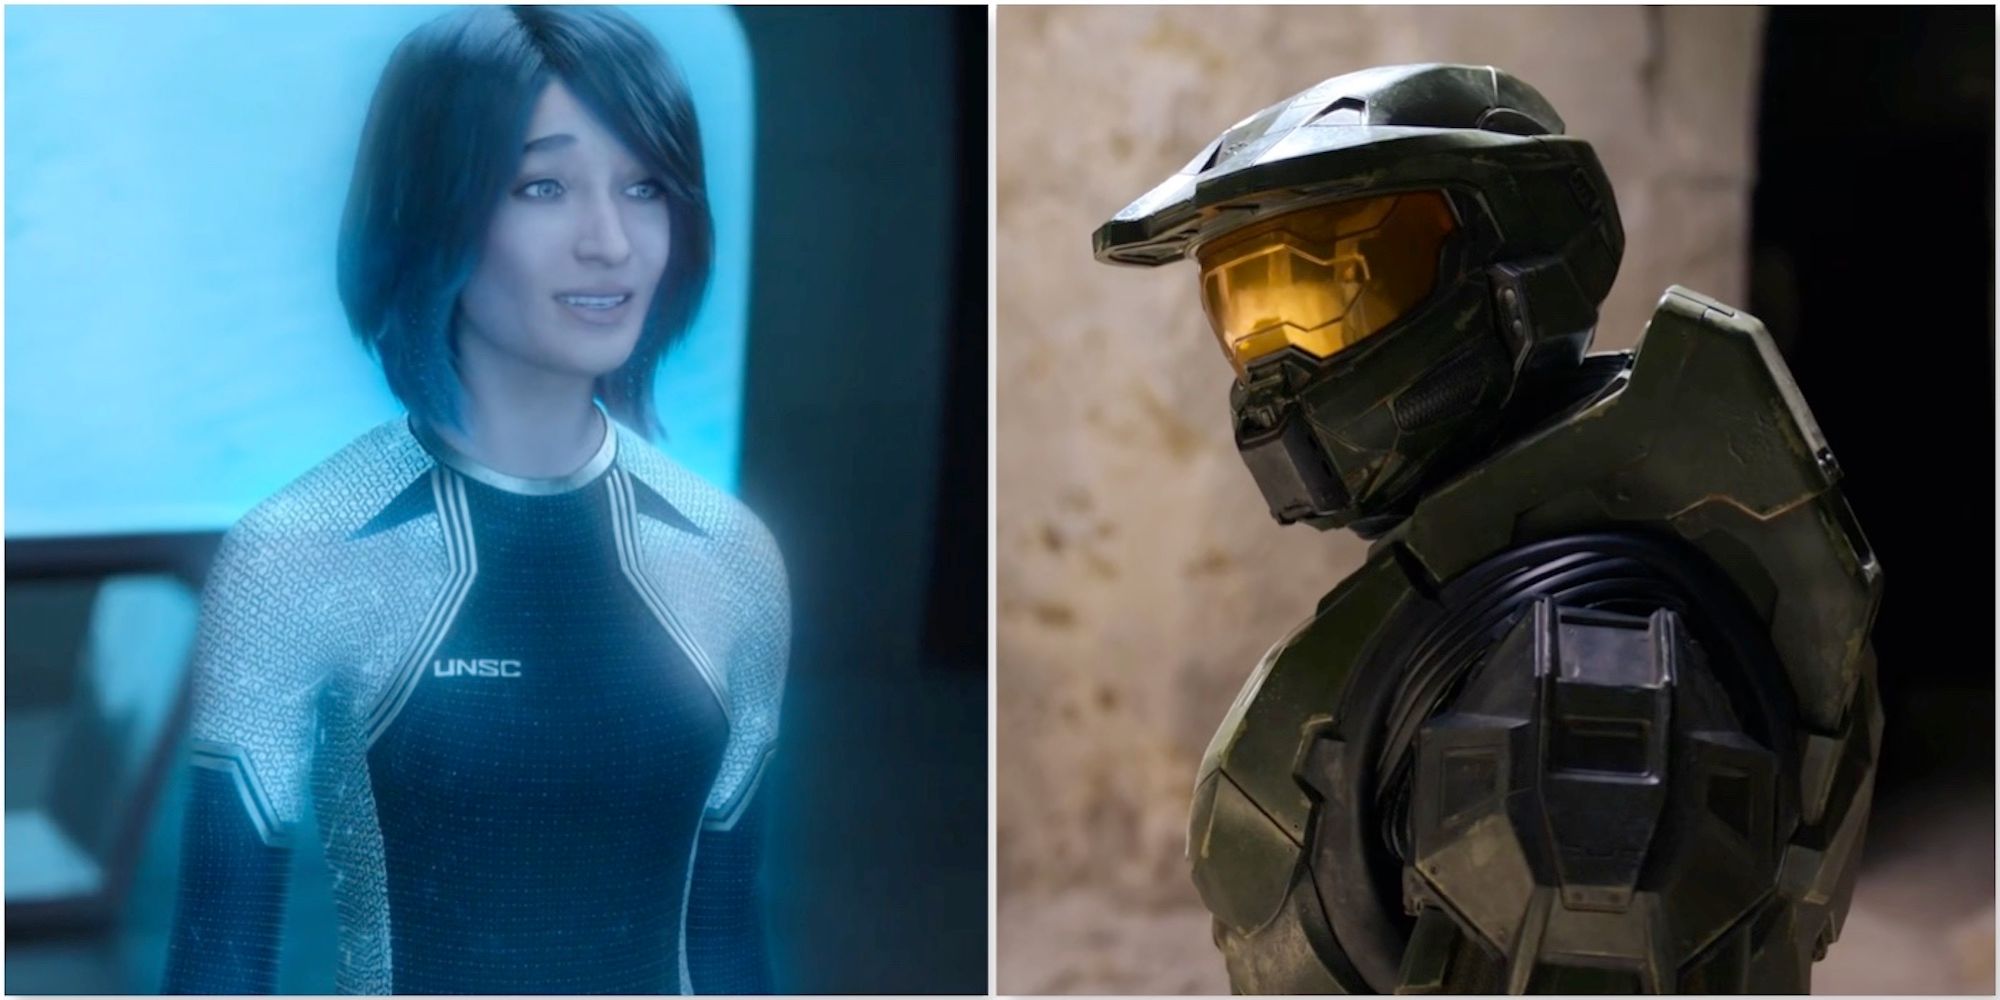 https://static0.gamerantimages.com/wordpress/wp-content/uploads/2022/05/00000-Cortana-and-Master-Chief-from-the-Halo-TV-show.jpg